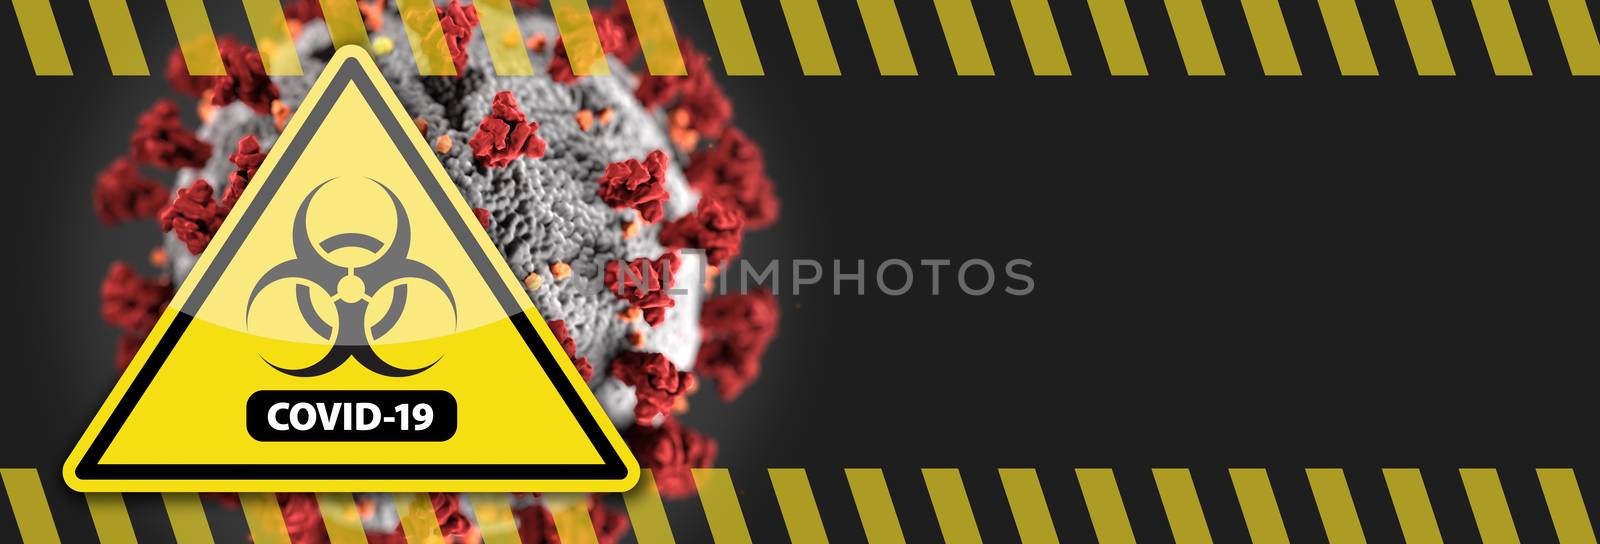 Banner of Coronavirus COVID-19 Bio-hazard Warning Sign with Virus Illustration Behind. by Feverpitched